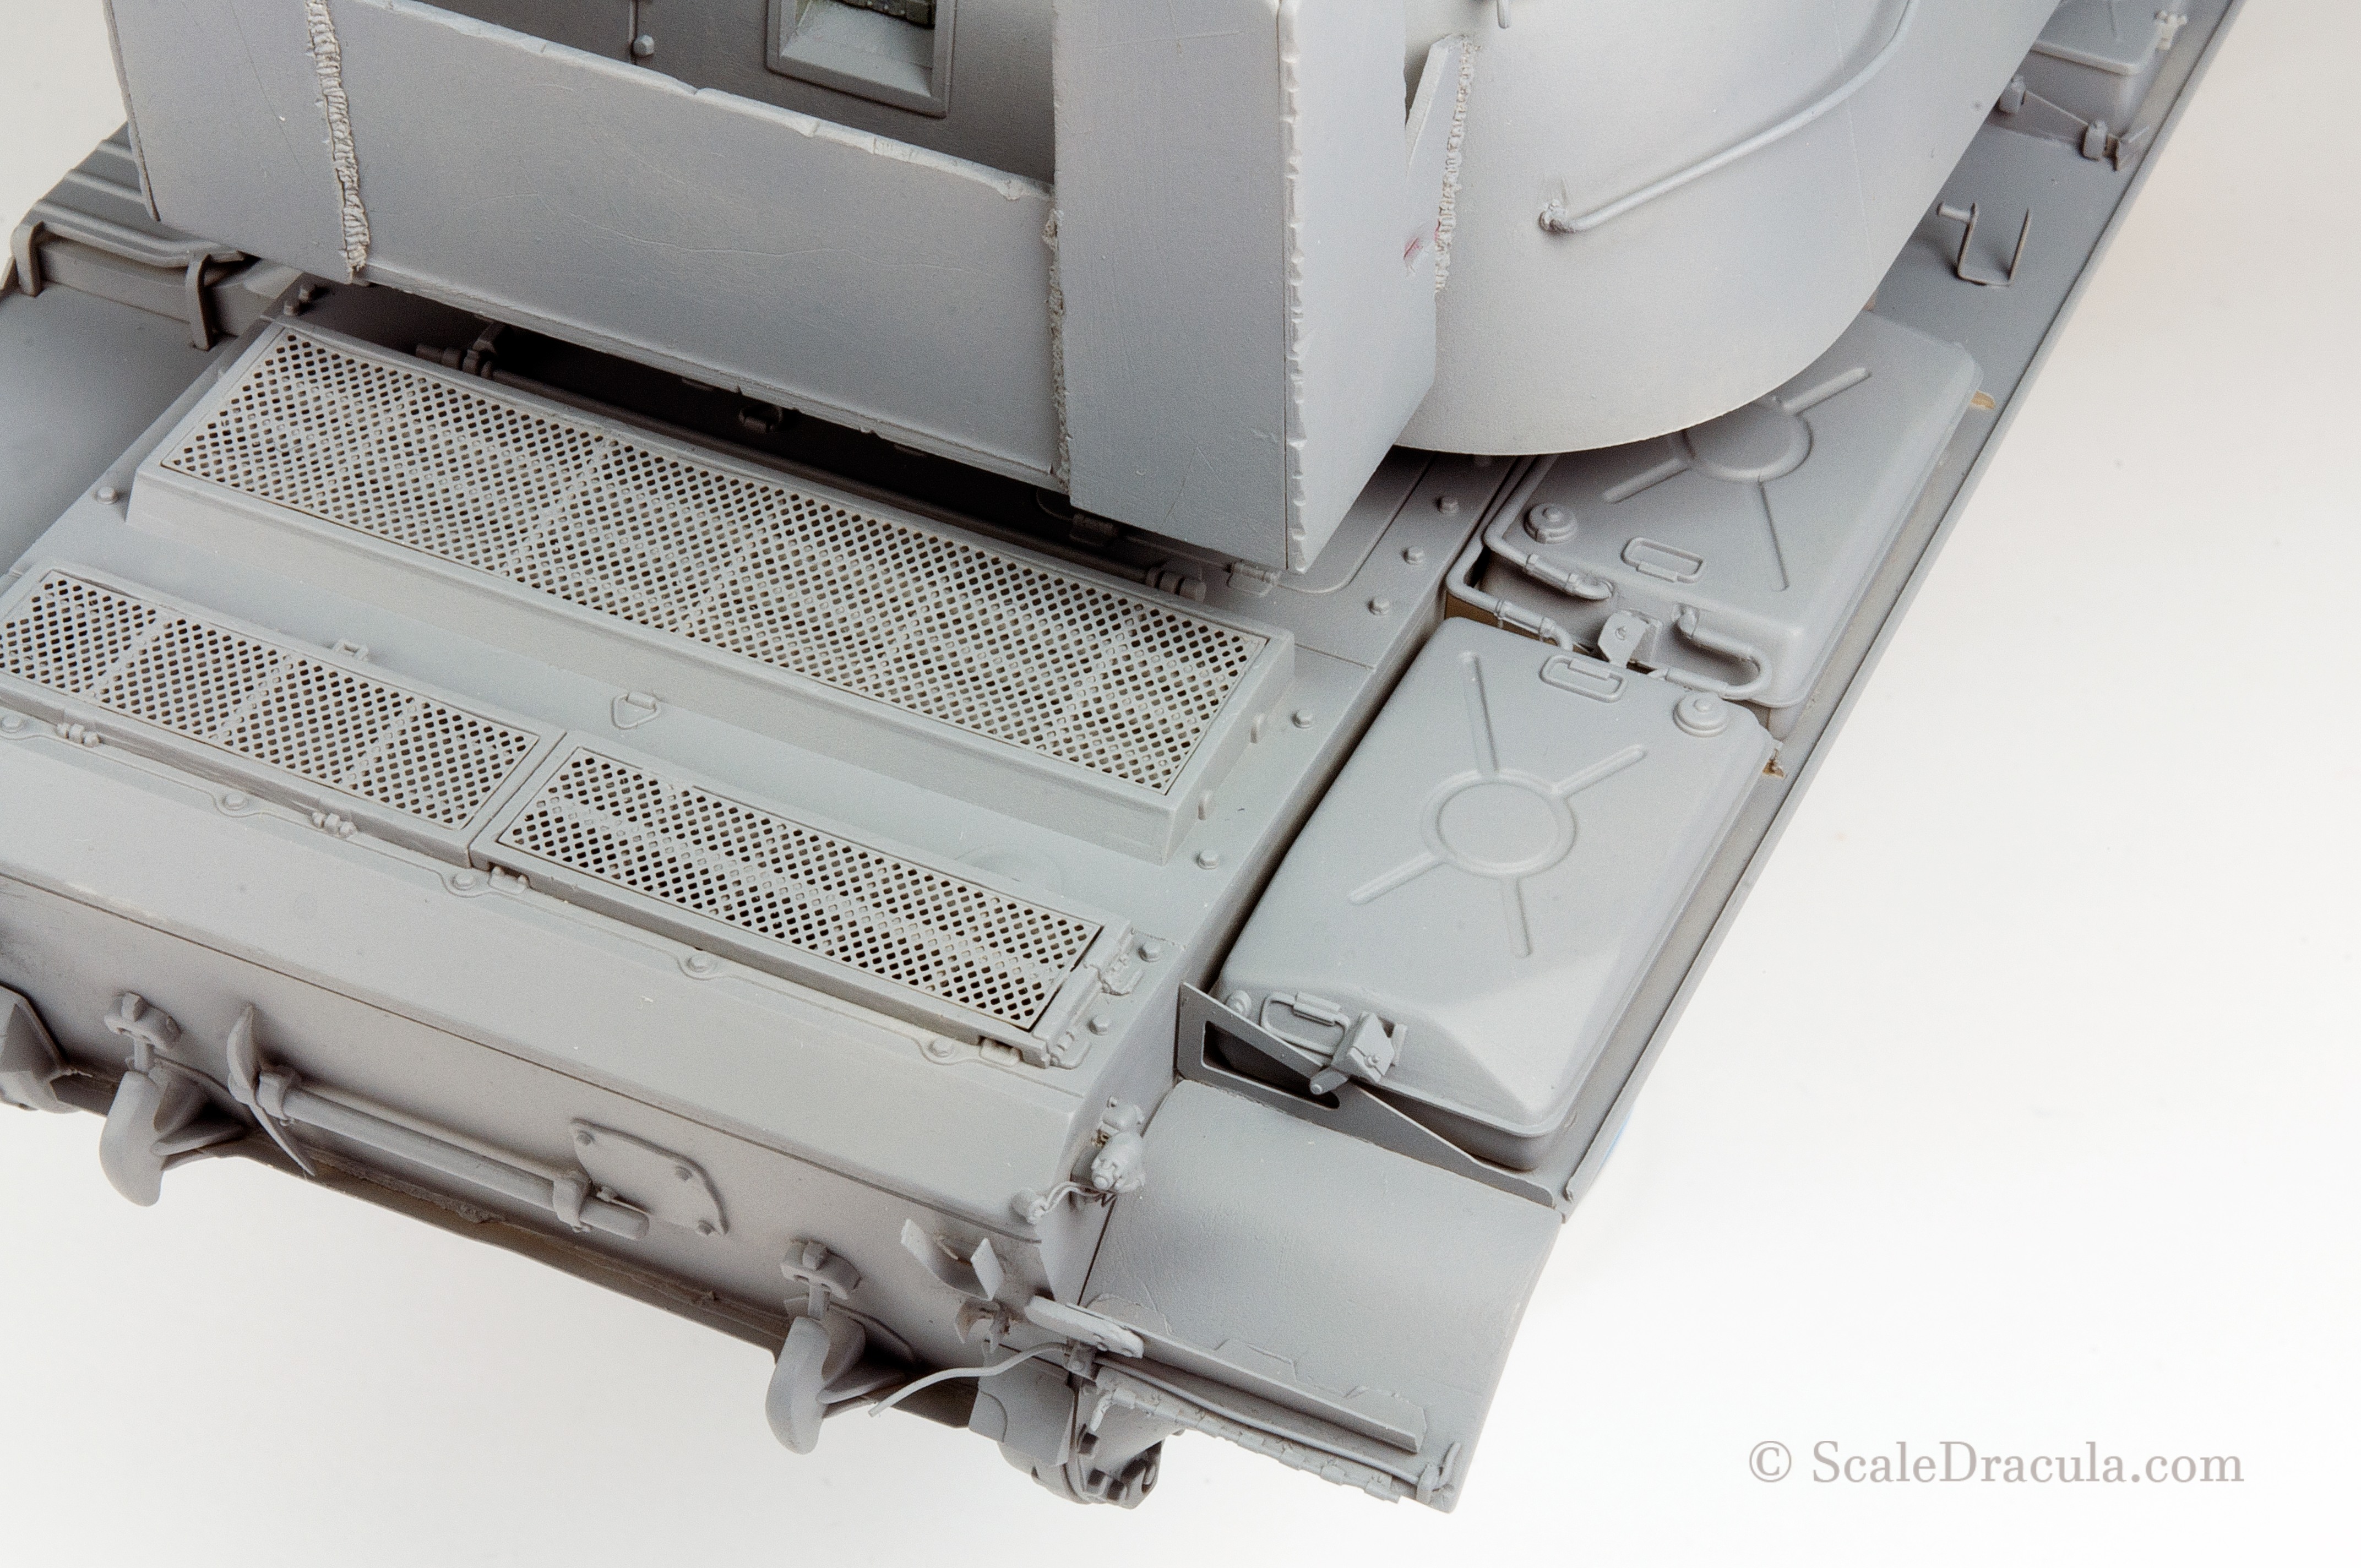 Details of the primed model, ZSU-57 by TAKOM